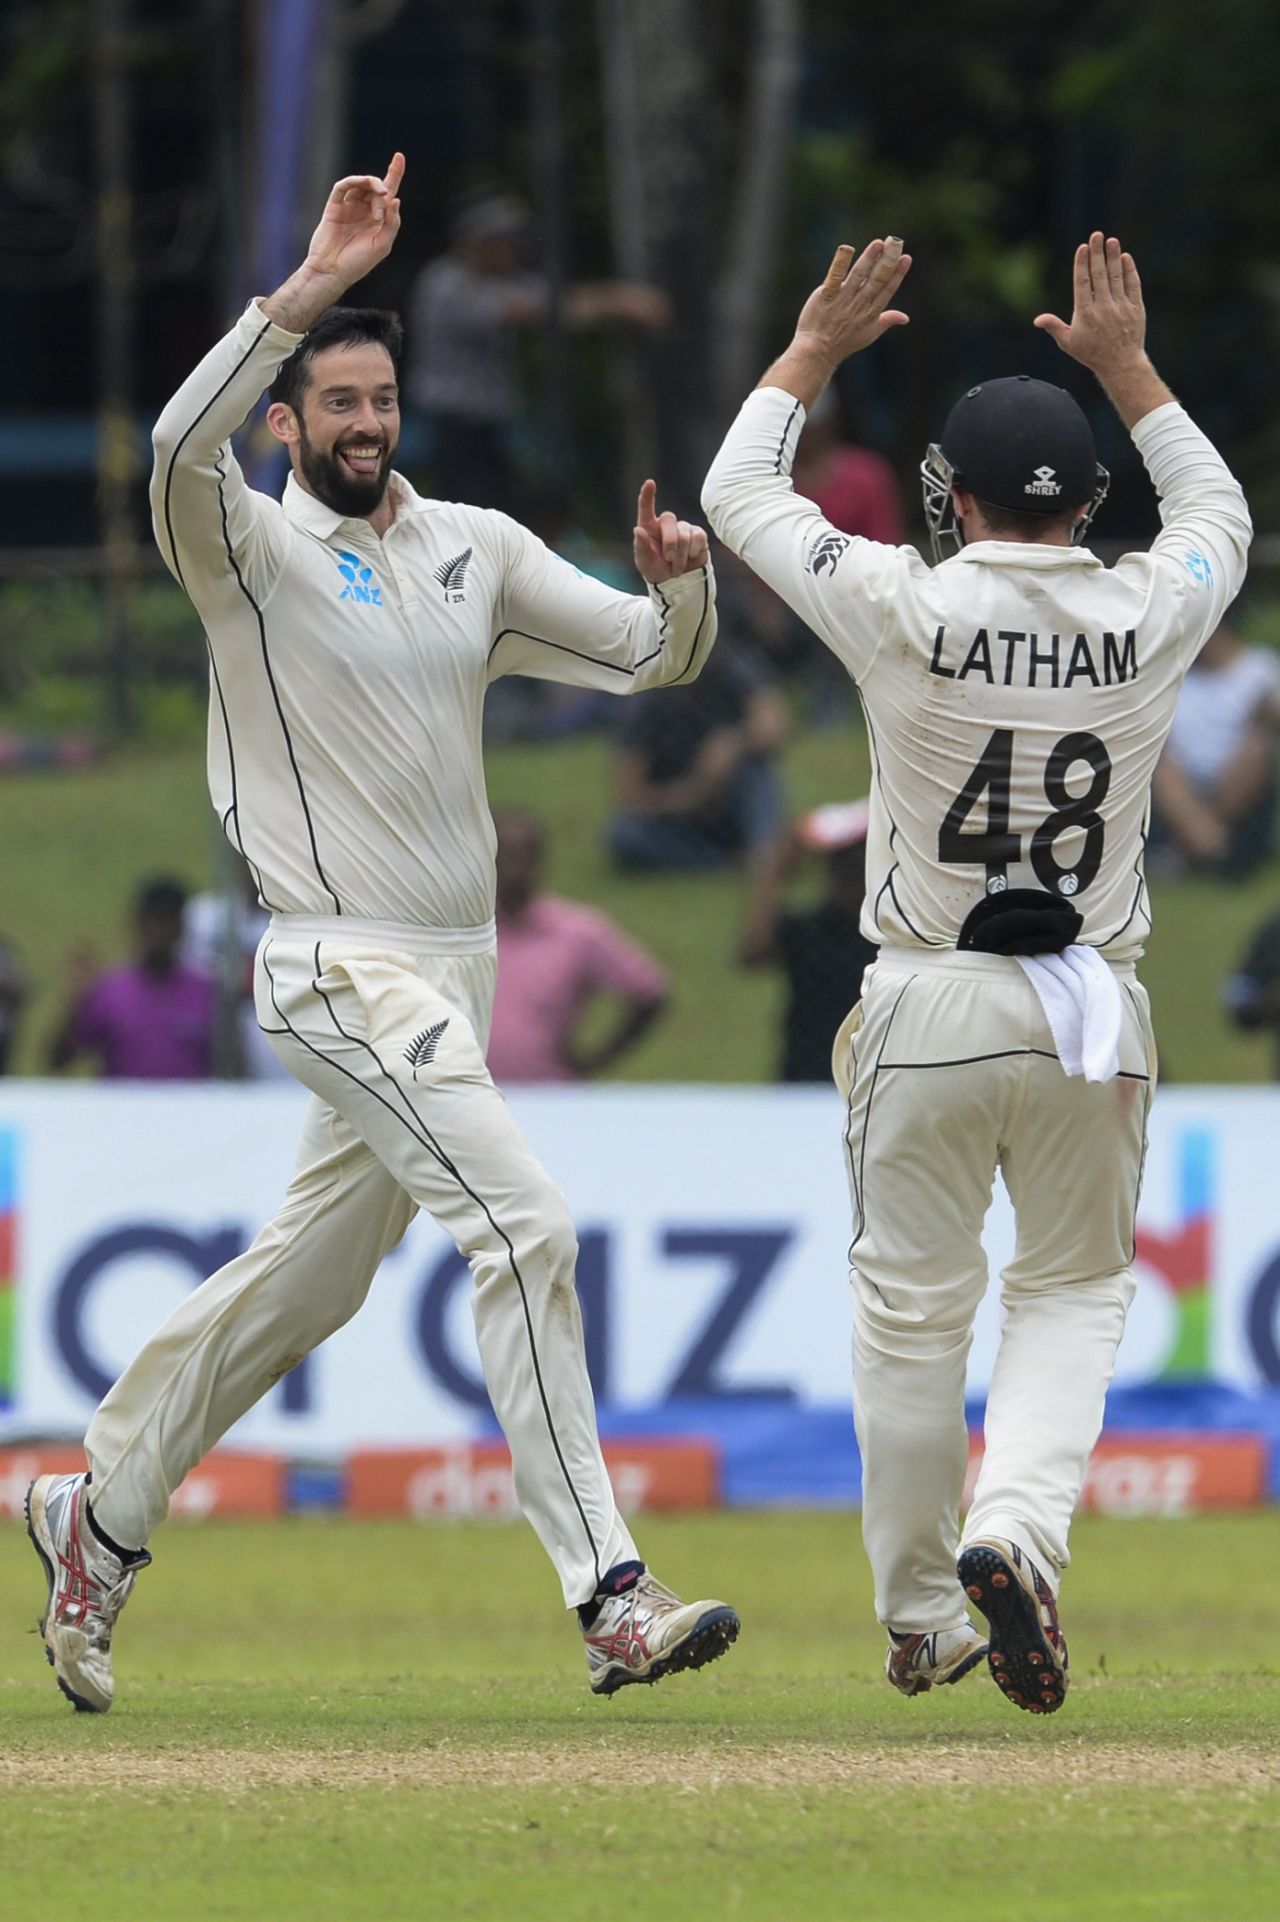 William Somerville is overjoyed after a key wicket, Sri Lanka v New Zealand, 2nd Test, Colombo (PSS), Day 5, August 26, 2019